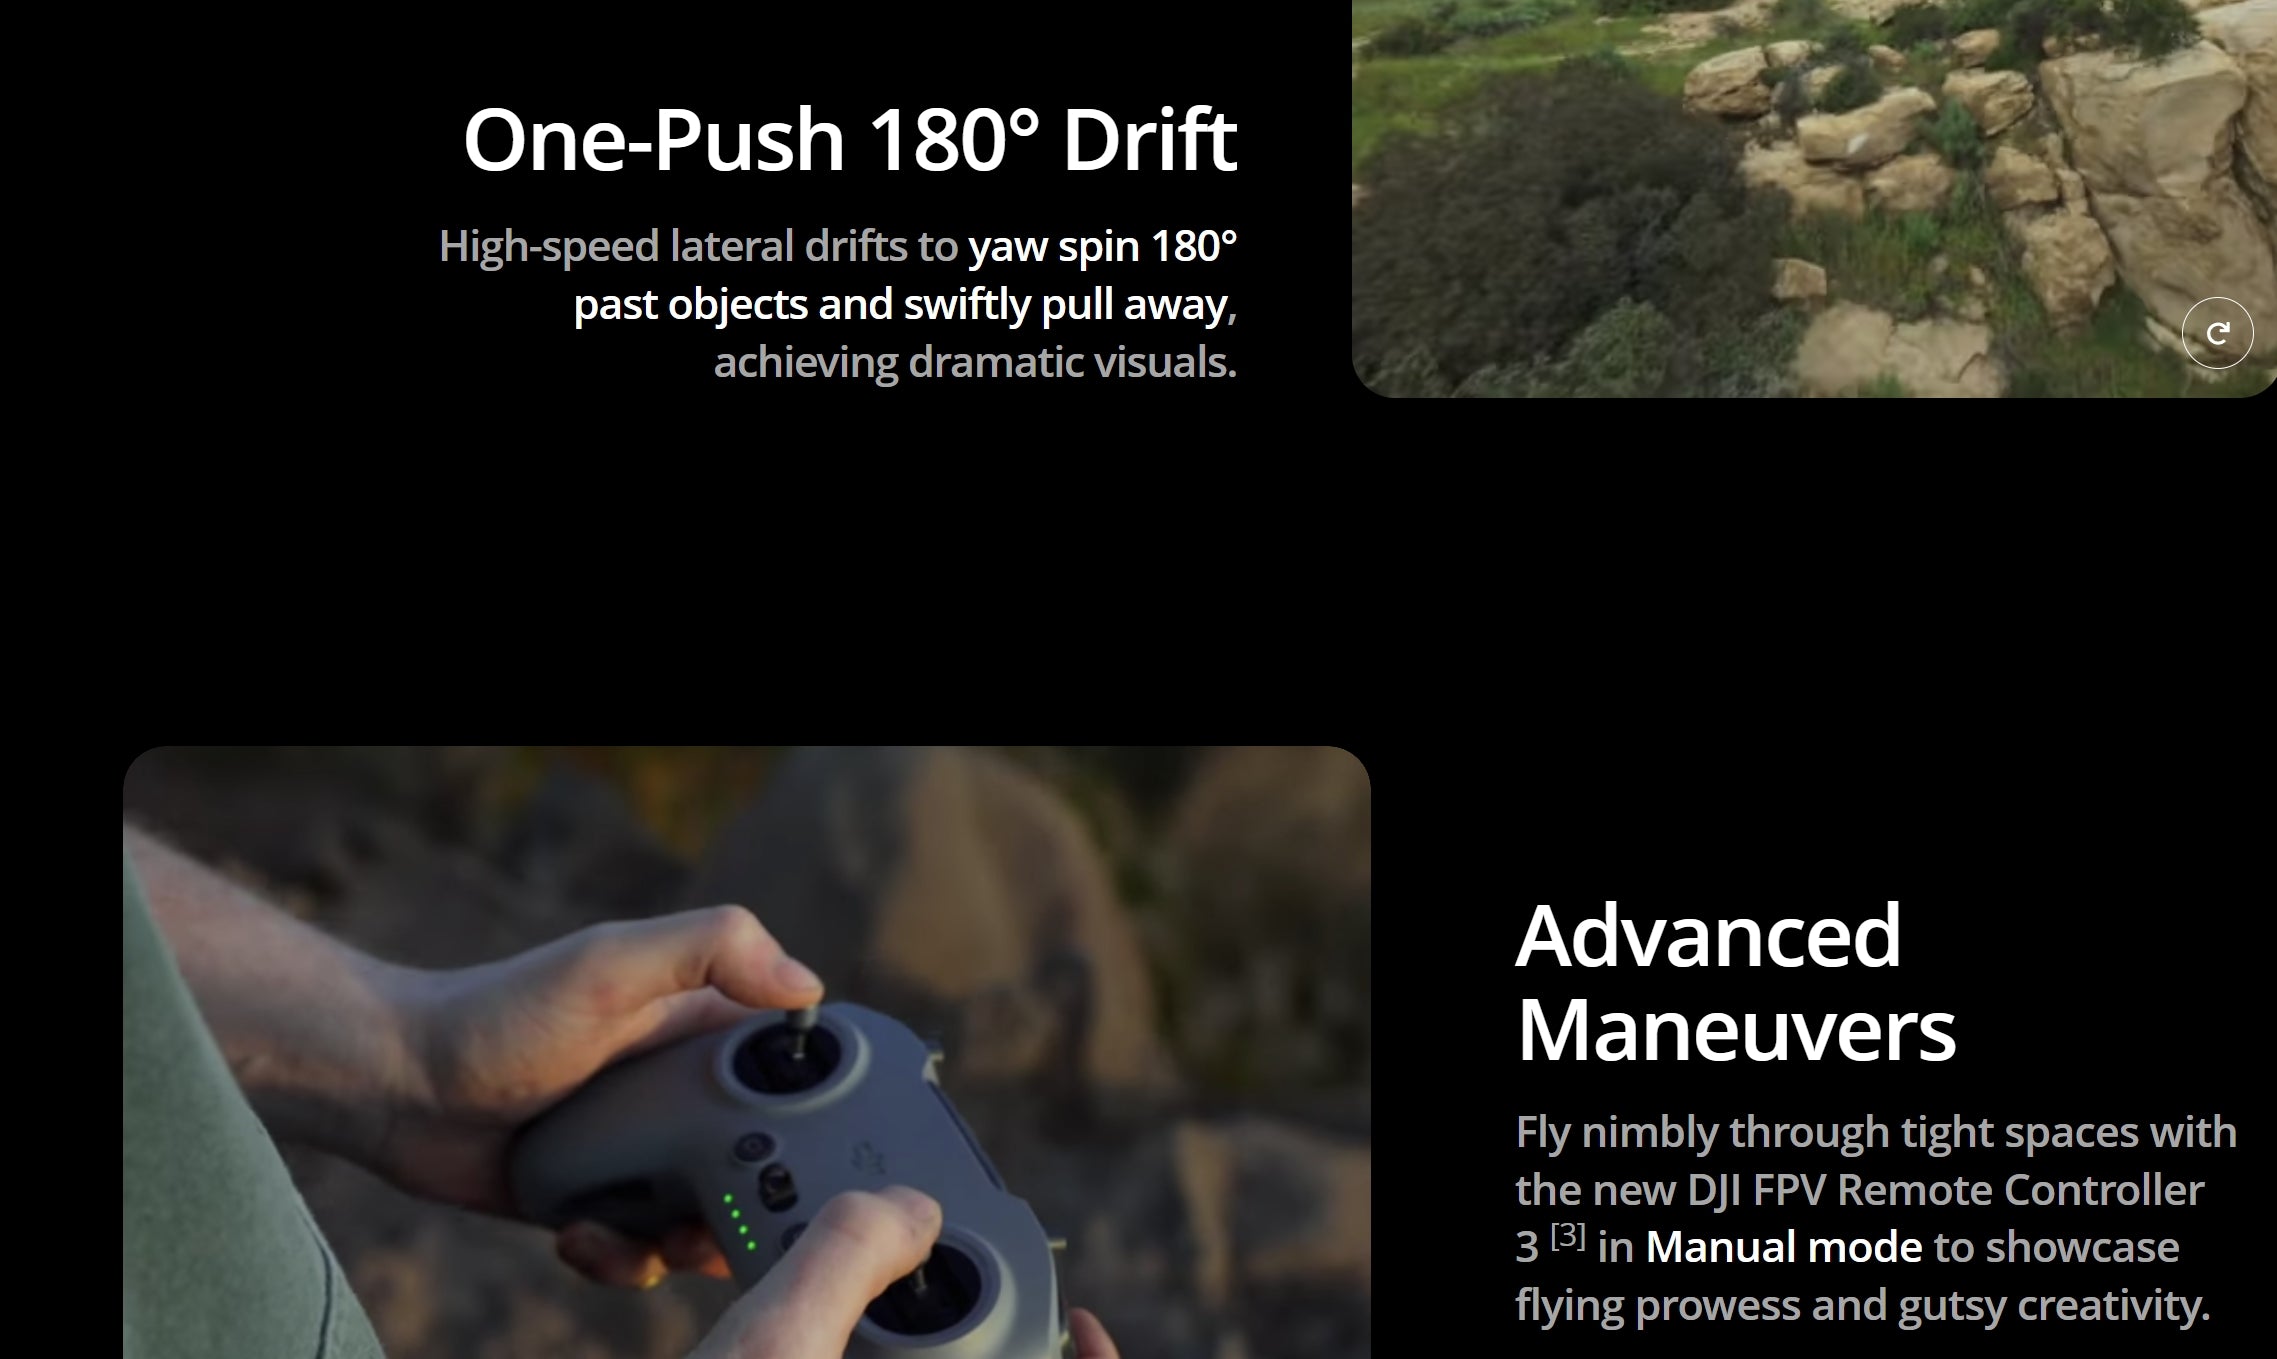 the new DJI FPV Remote Controller 3 features one-push lateral drifts